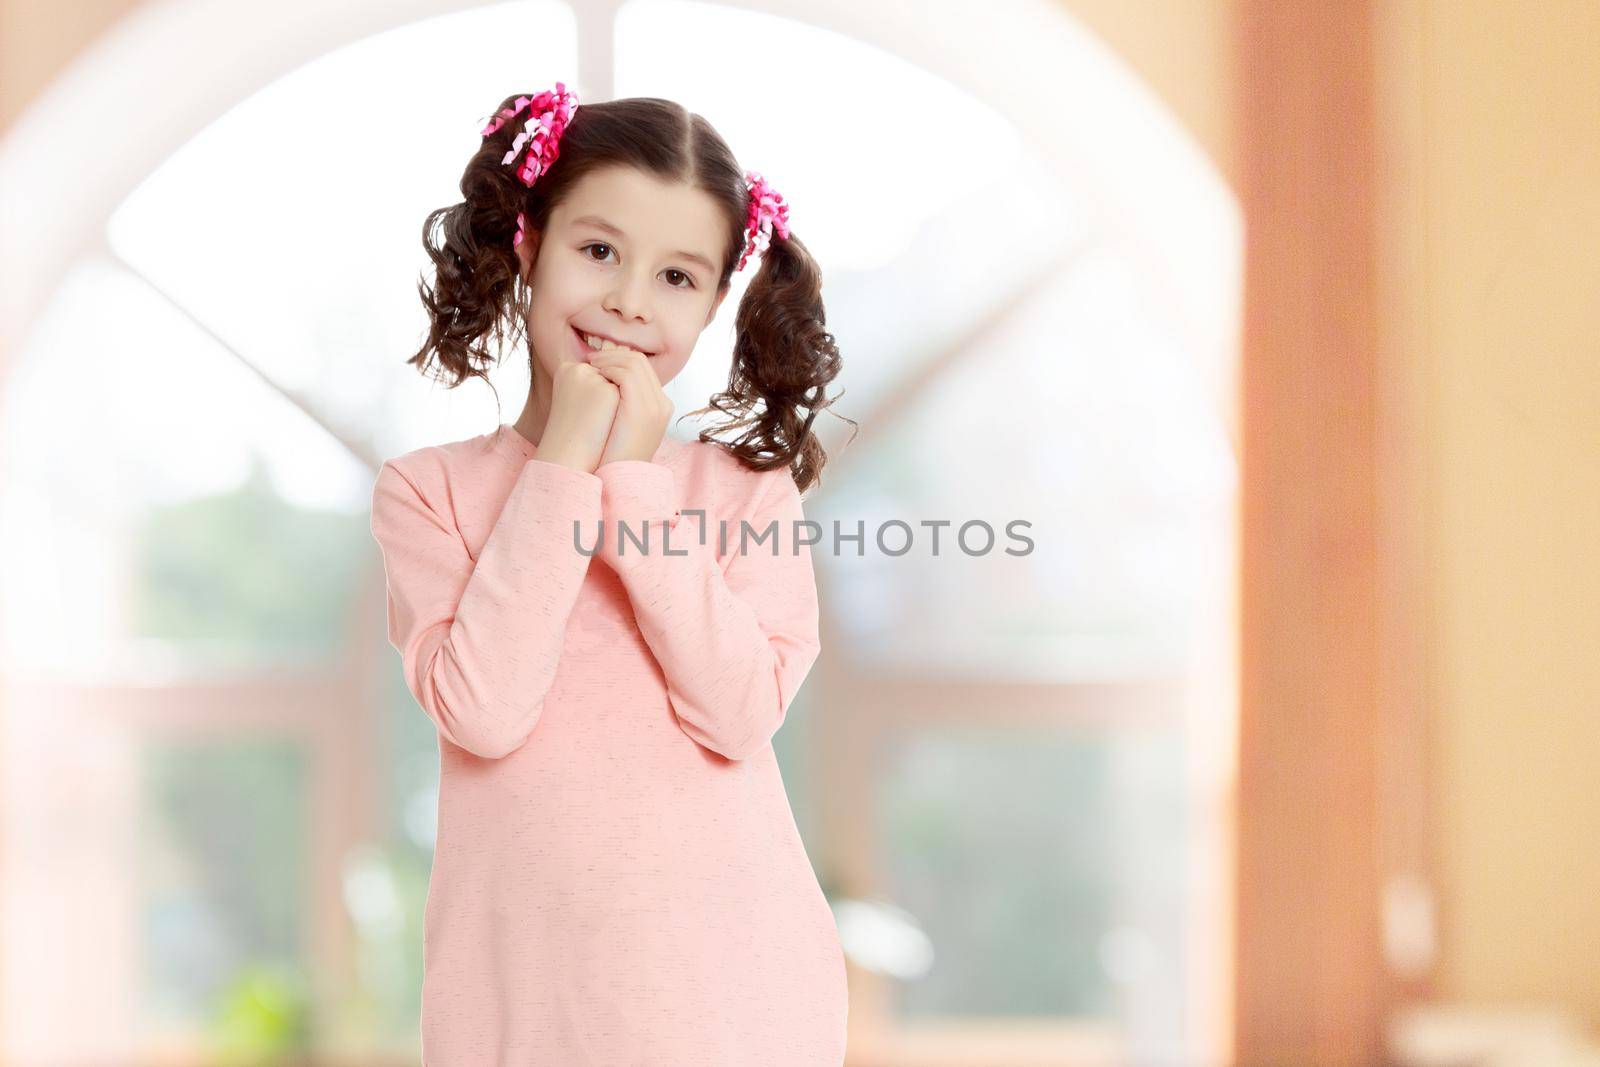 Beautiful little girl with long curly tails on the head,in which braided red ribbons . In long pink dress. The girl shyly holding hands near the face. In a room with a large semi-circular window.